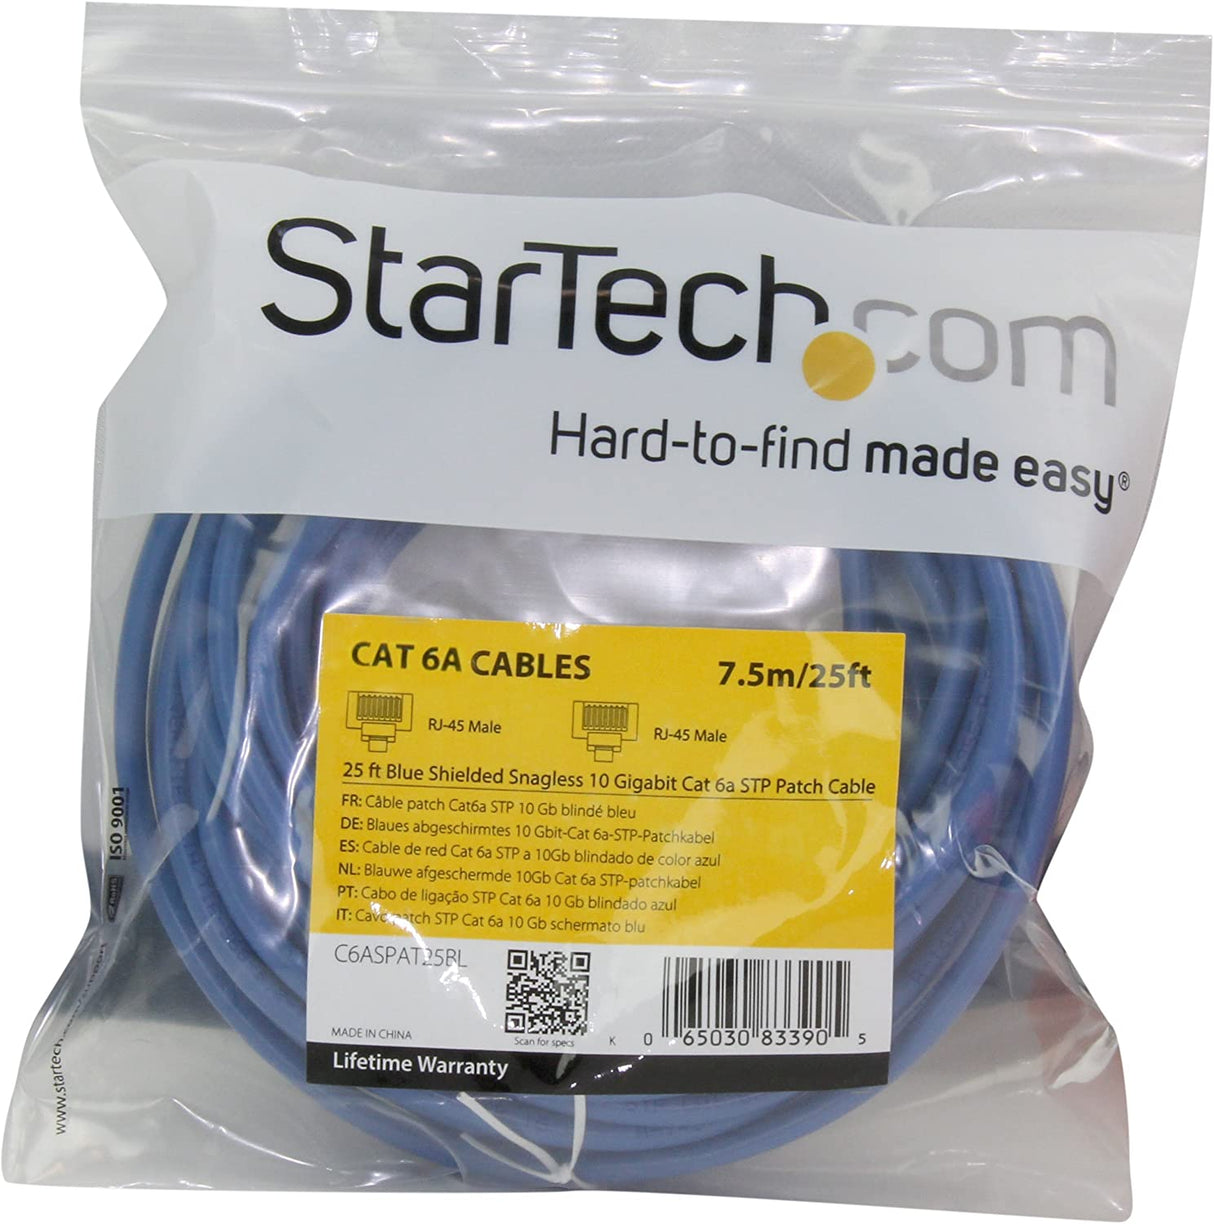 StarTech.com 25ft CAT6a Ethernet Cable - 10 Gigabit Shielded Snagless RJ45 100W PoE Patch Cord - 10GbE STP Network Cable w/Strain Relief - Blue Fluke Tested/Wiring is UL Certified/TIA (C6ASPAT25BL) 25 ft Blue